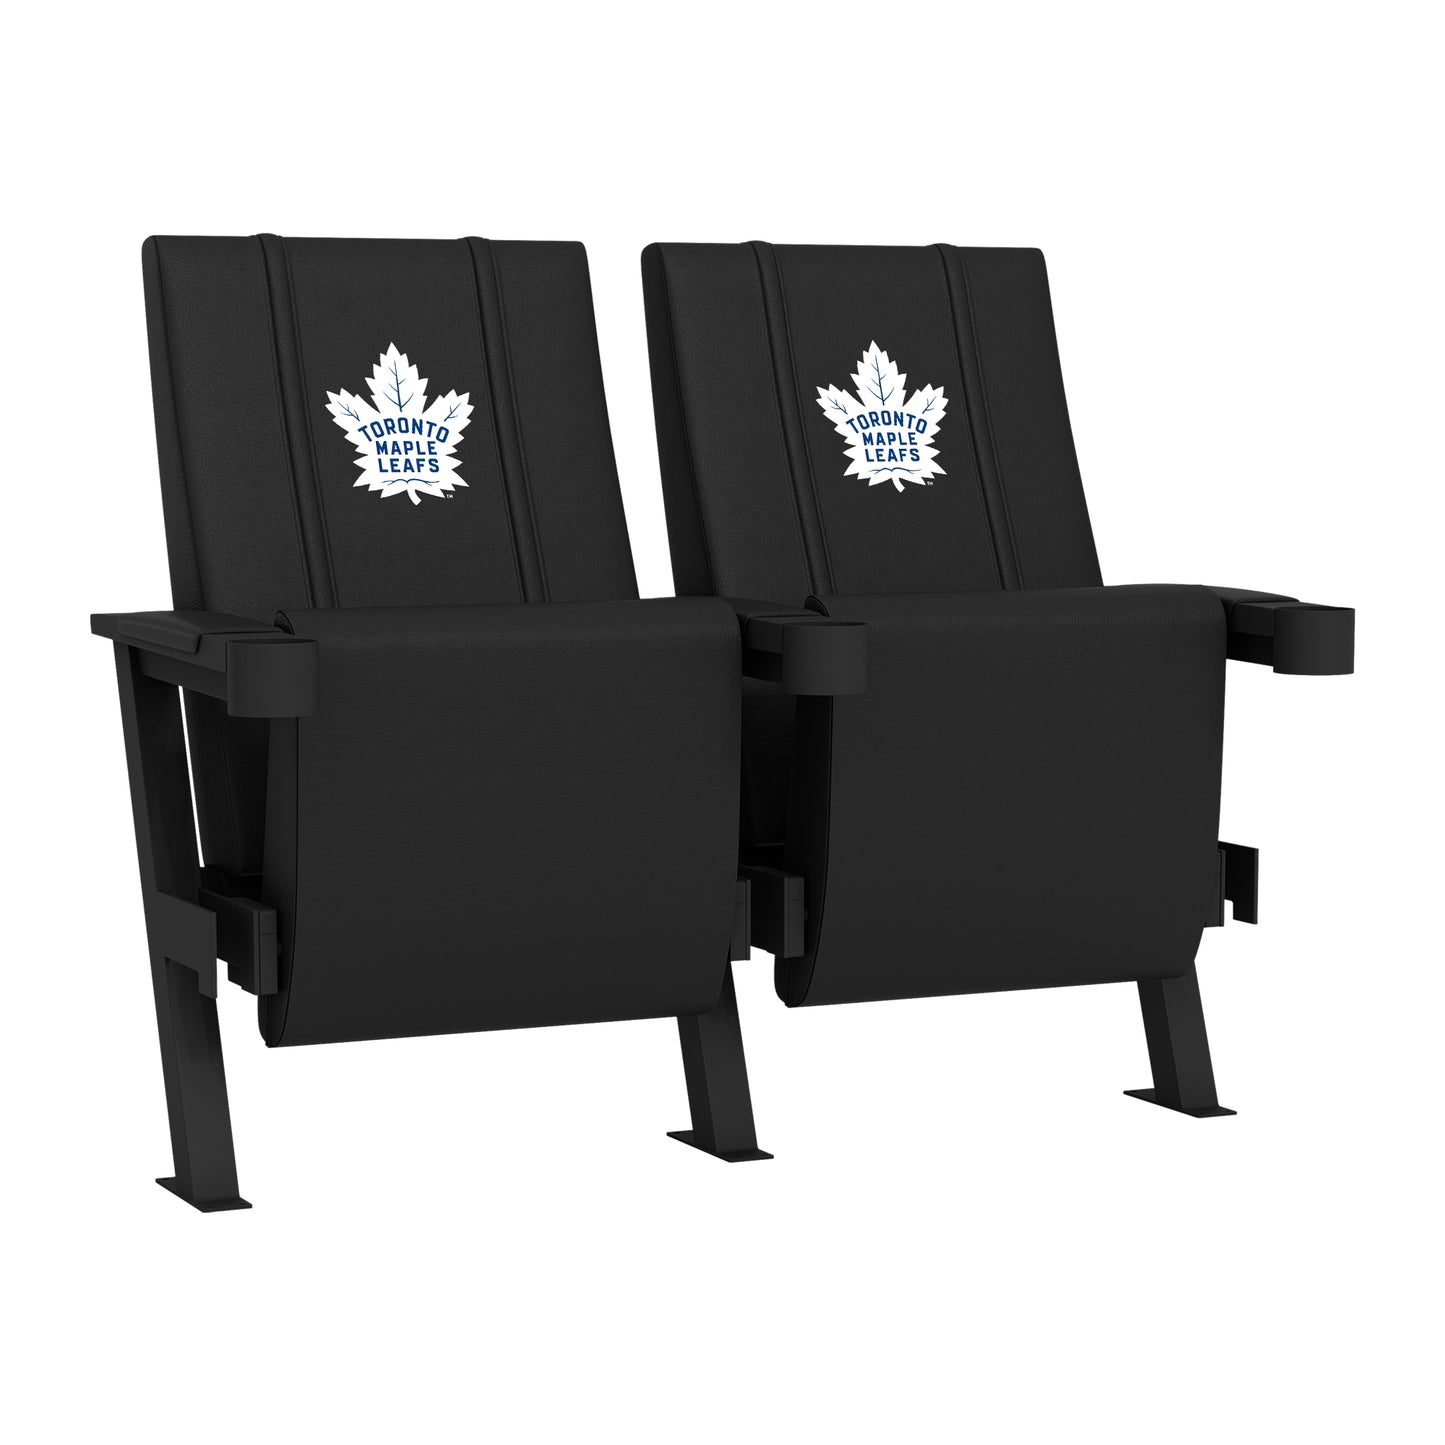 SuiteMax 3.5 VIP Seats with Toronto Maple Leafs Logo